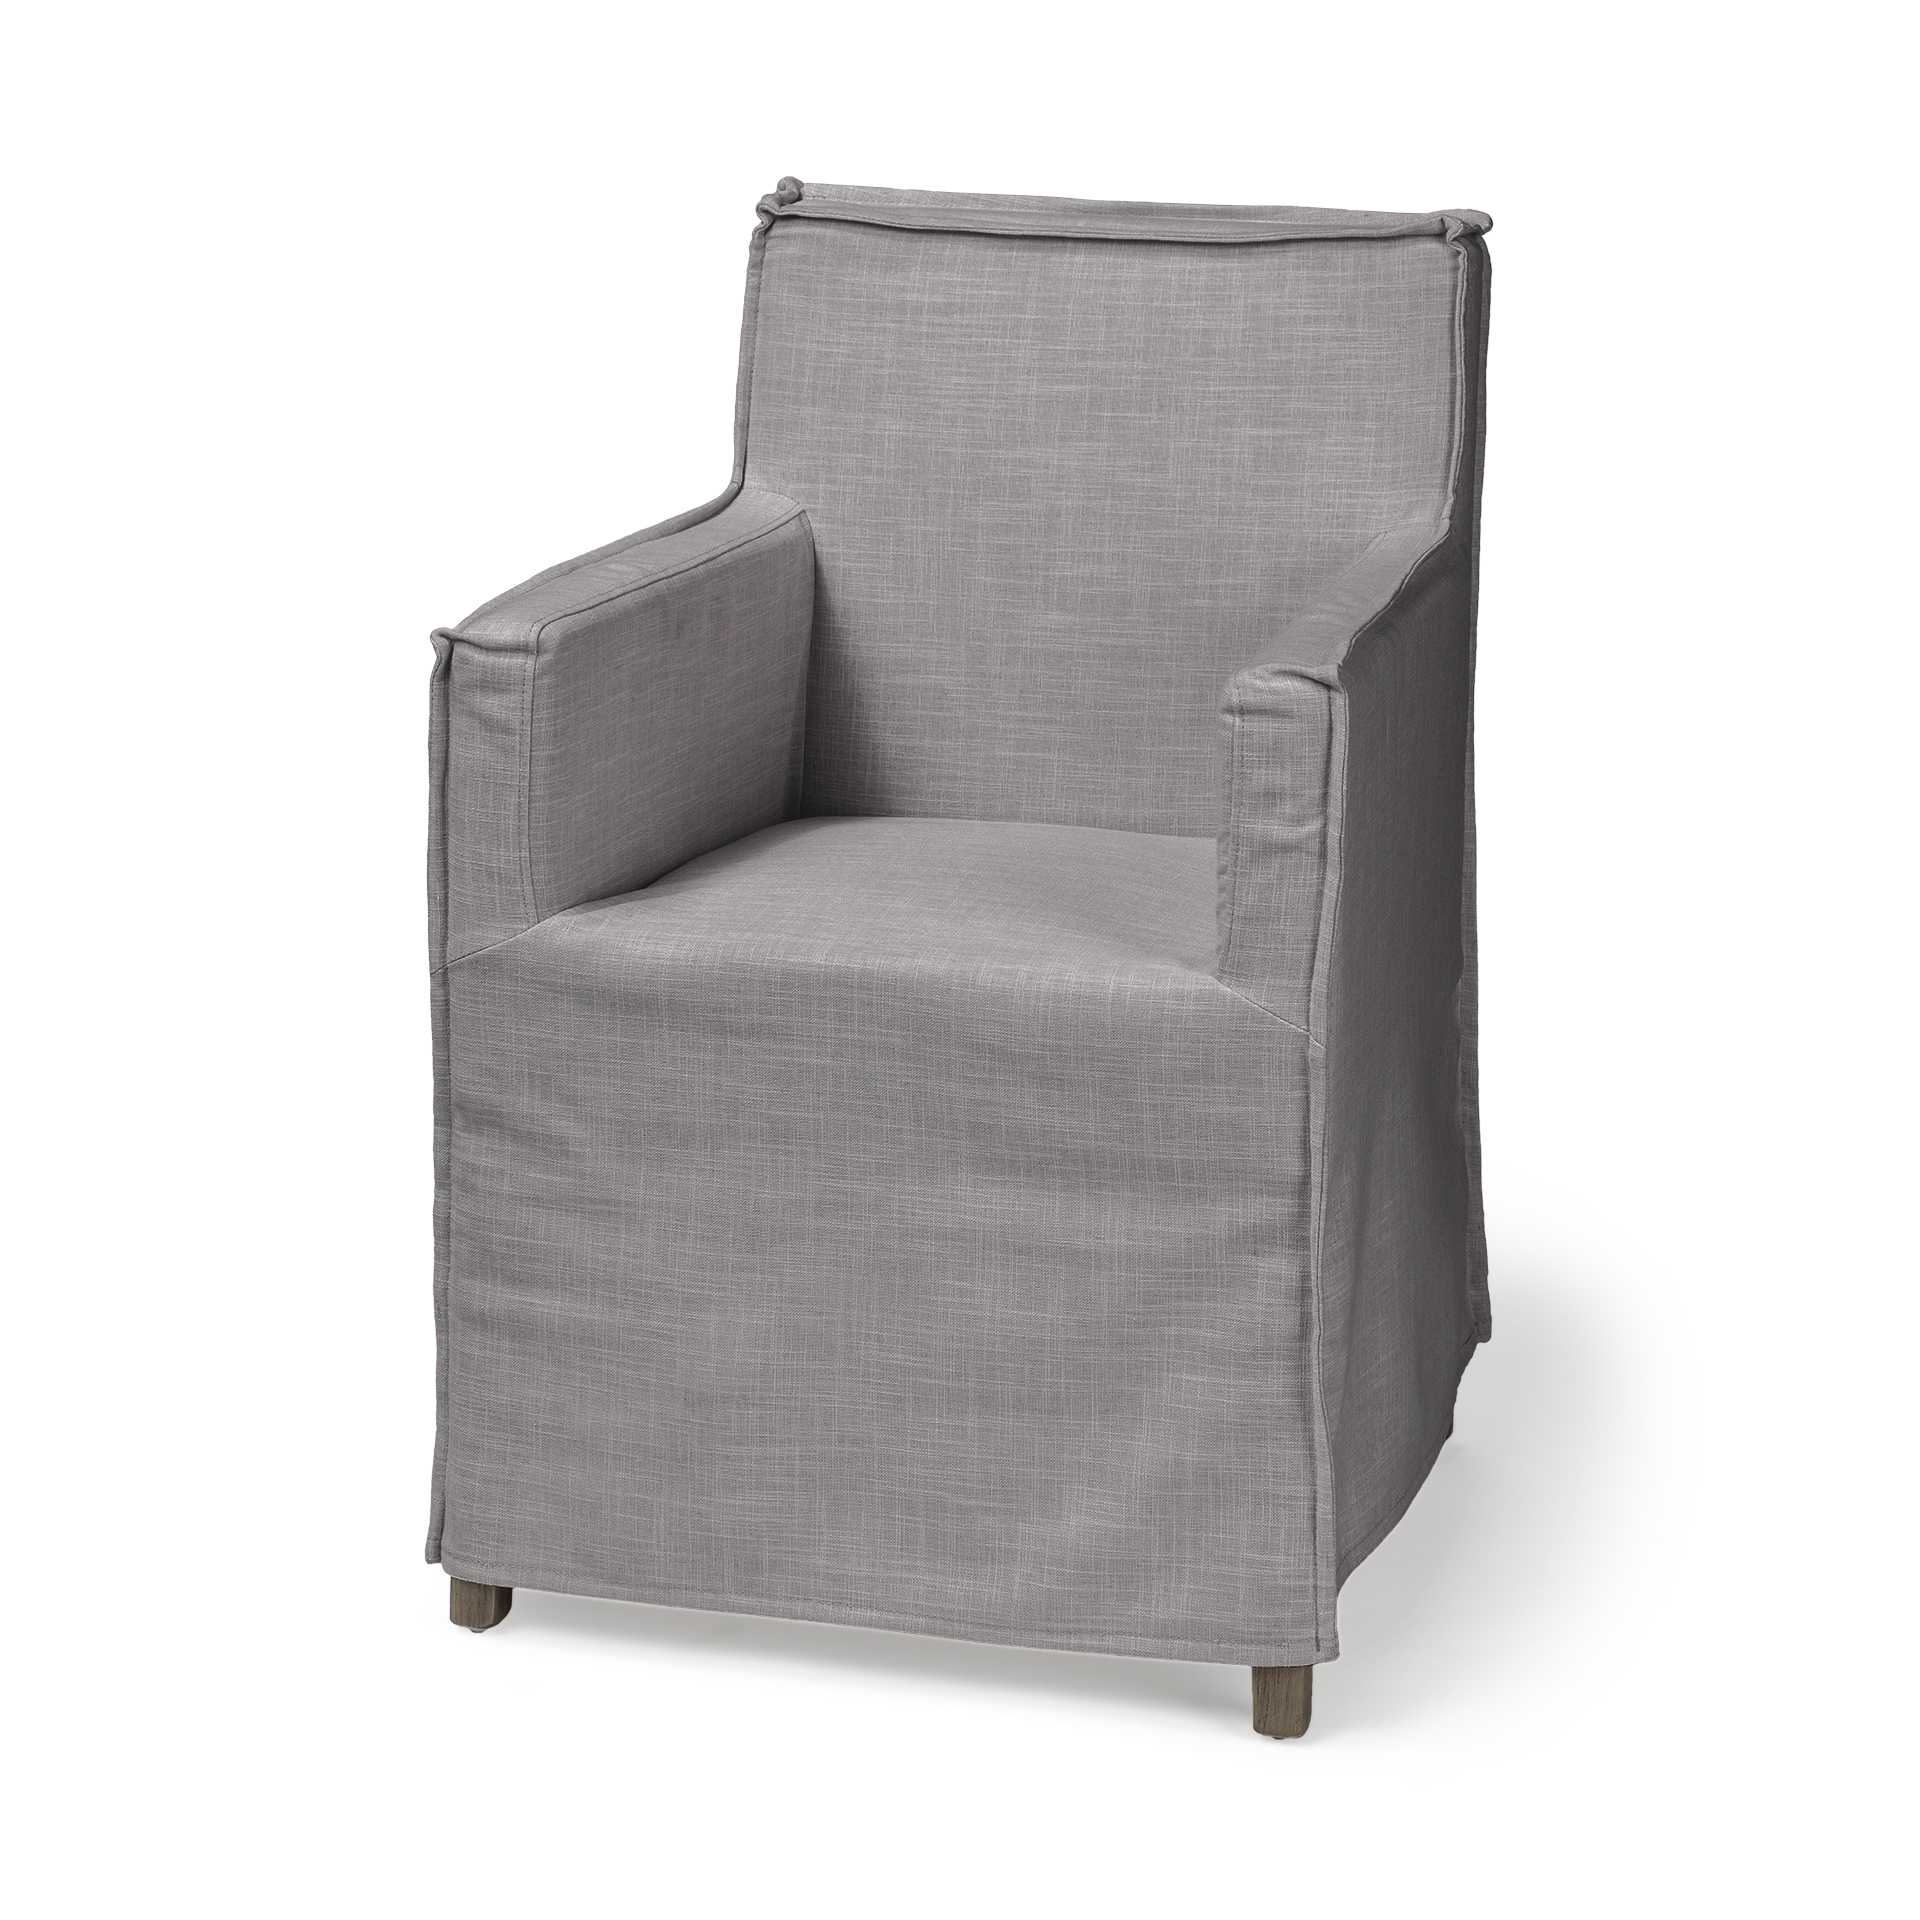 Grey Fabric Slip Cover with Brown Wooden Base Dining Chair